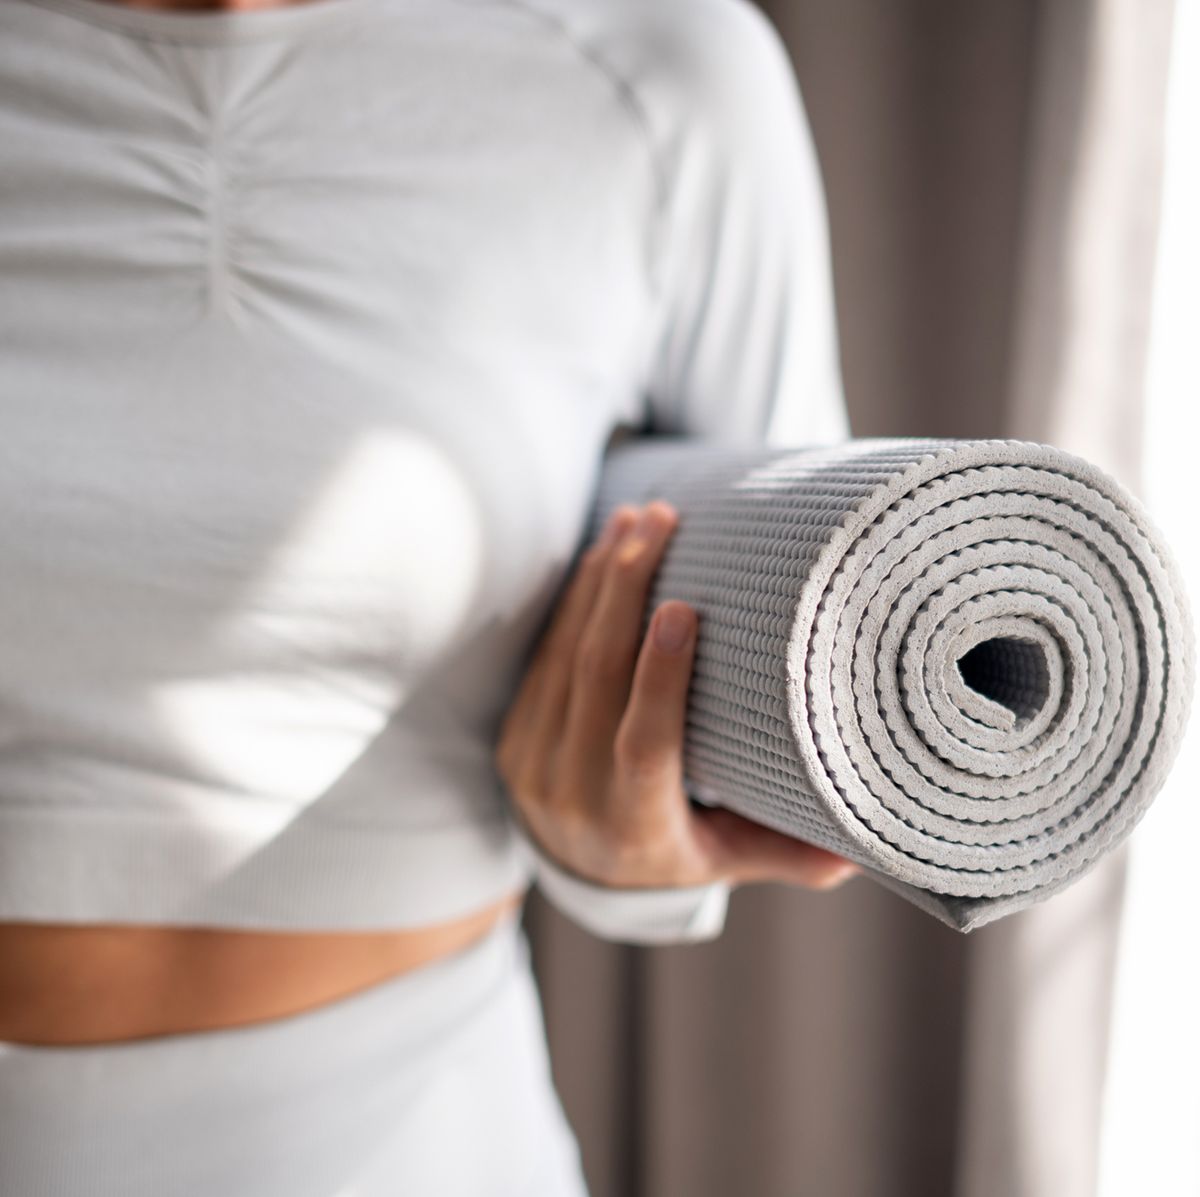 https://hips.hearstapps.com/hmg-prod/images/the-body-of-a-slender-girl-holds-a-yoga-mat-in-her-royalty-free-image-1695218867.jpg?crop=0.668xw:1.00xh;0.181xw,0&resize=1200:*